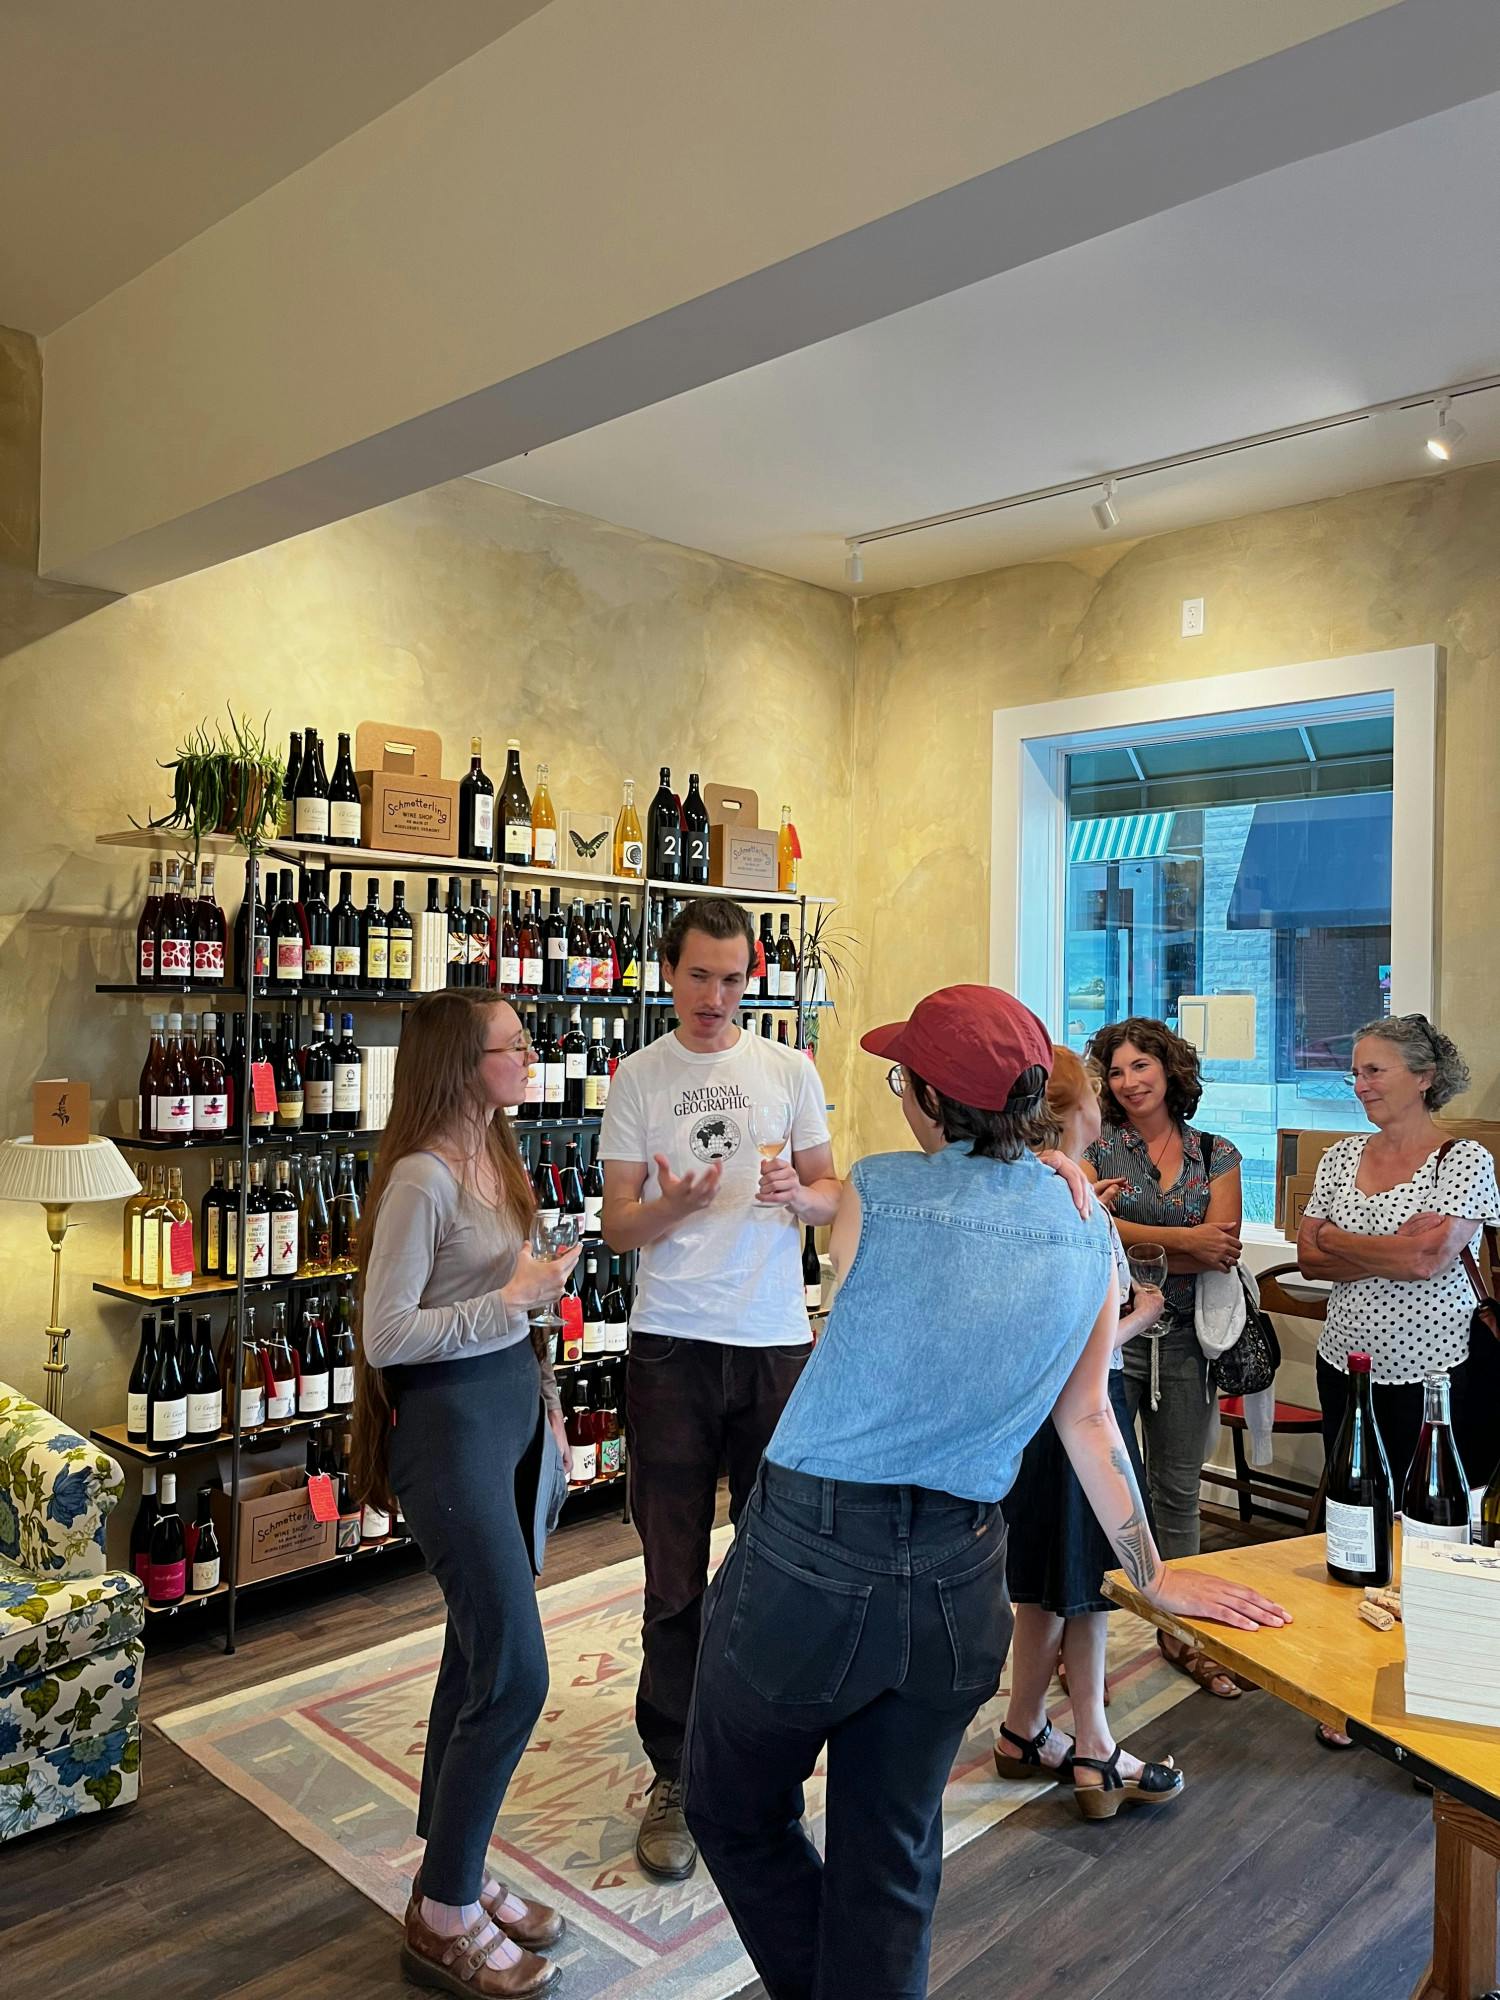 The interior of Schmetterling Wine Shop, located at 48 Main Street in downtown Middlebury